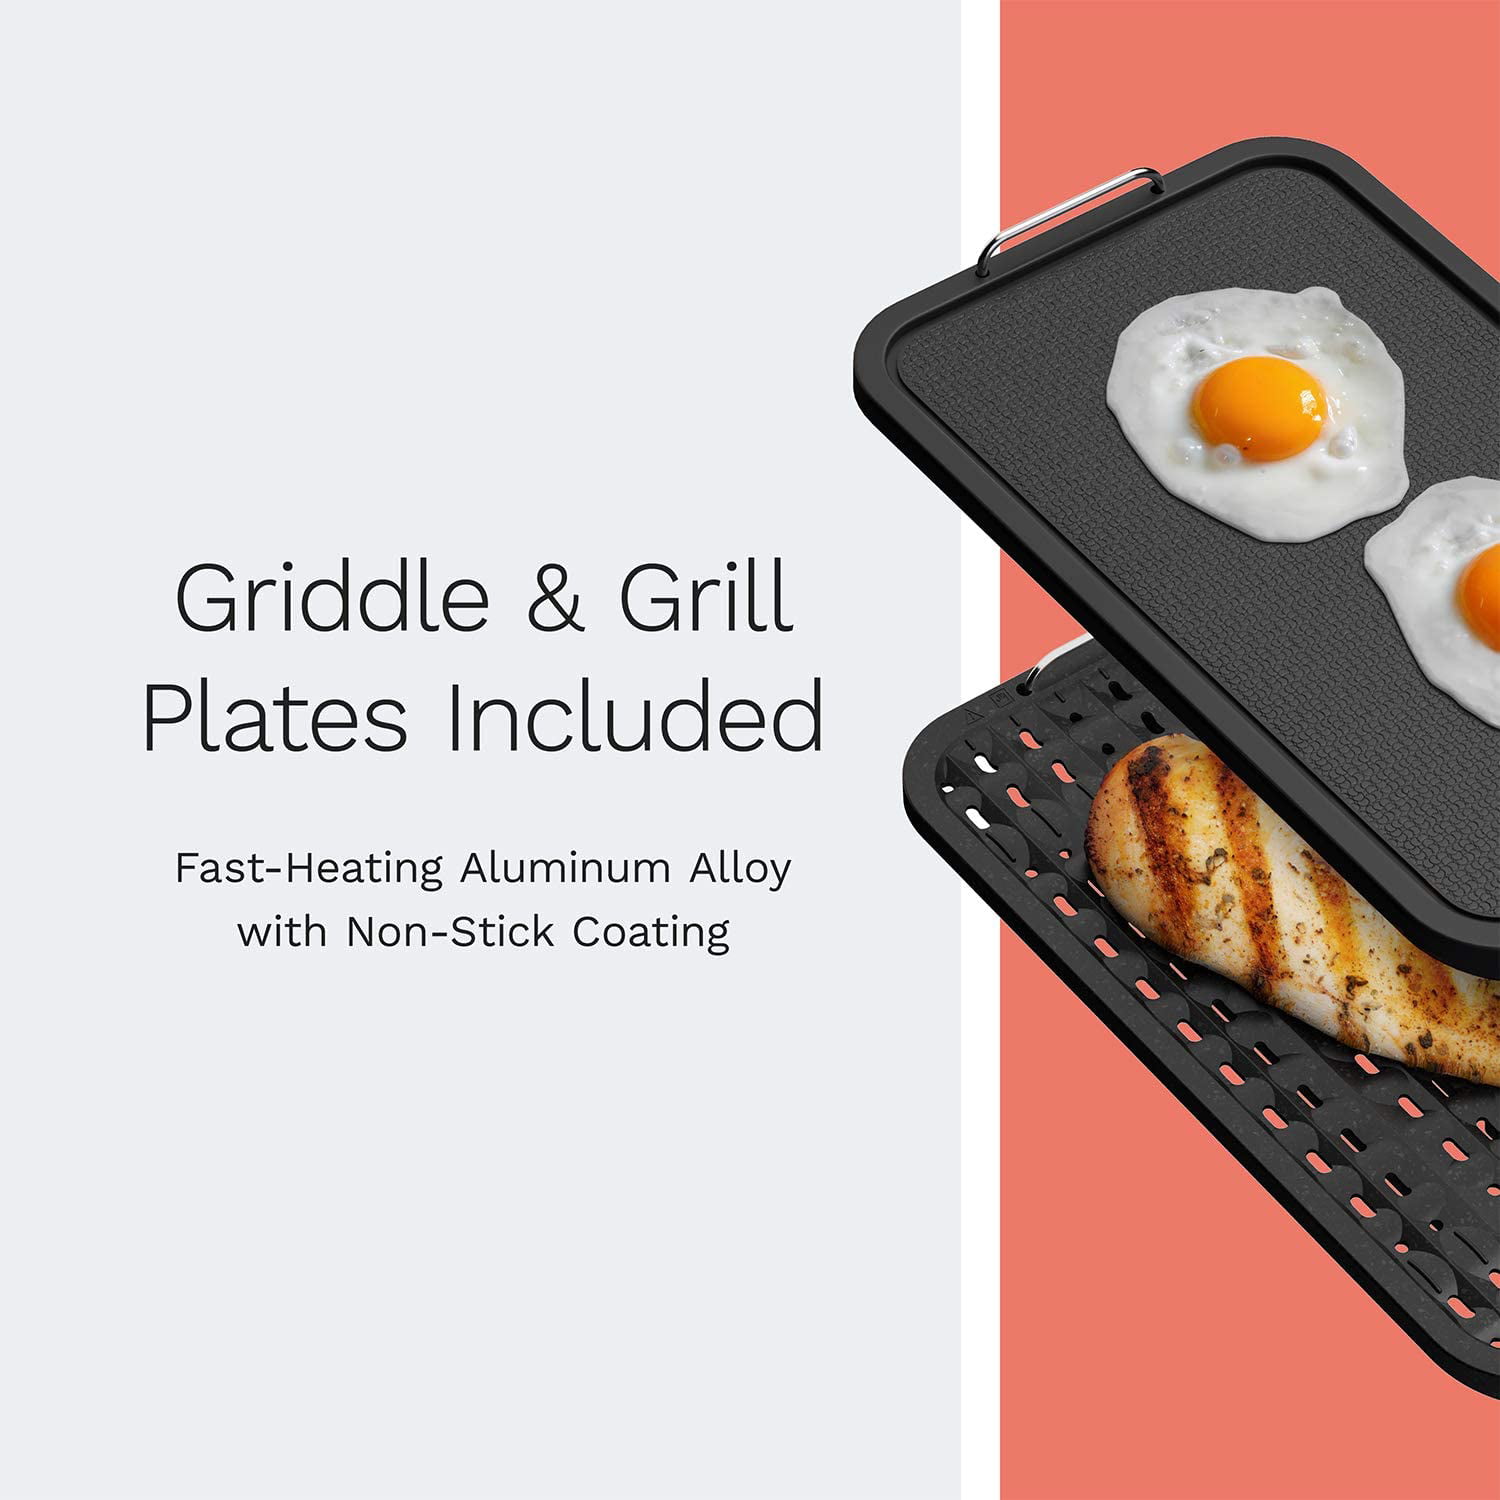 1500 Watt Nonstick Cooking Surfaces anmas rucci Smokeless Electric Indoor Removable Grill and Griddle Plates 